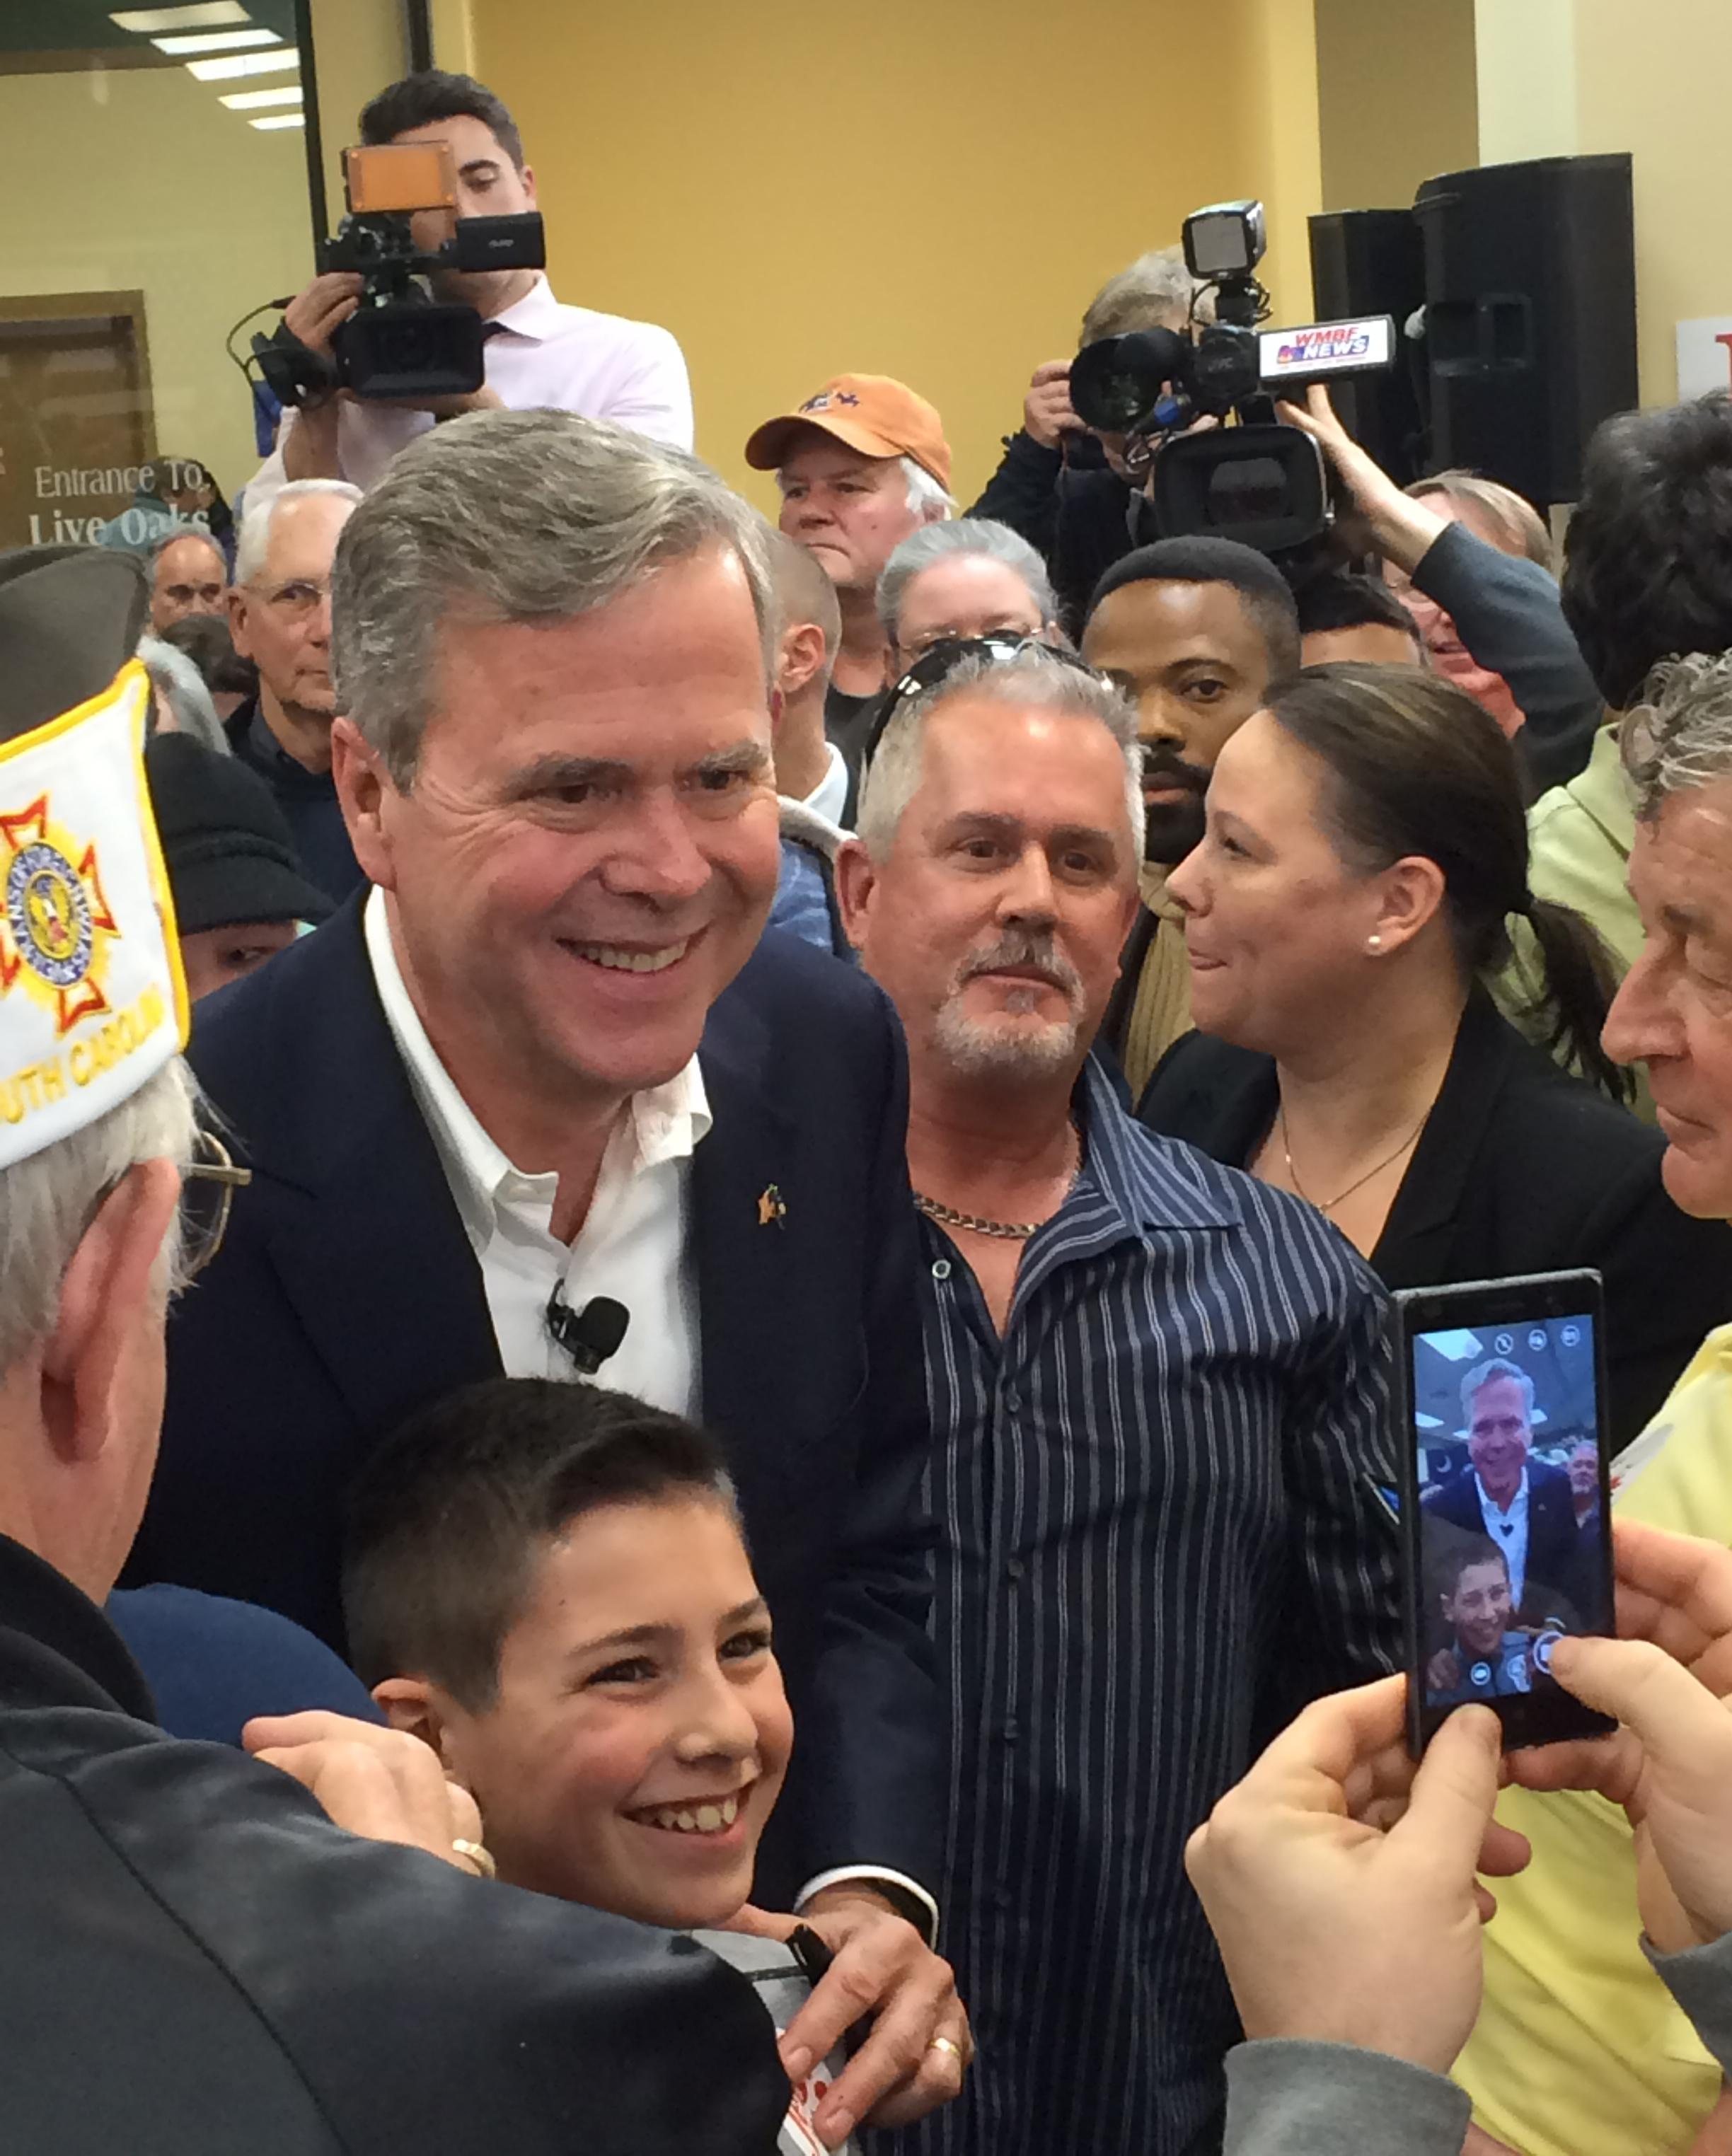 A photo I took of Jeb after the event.